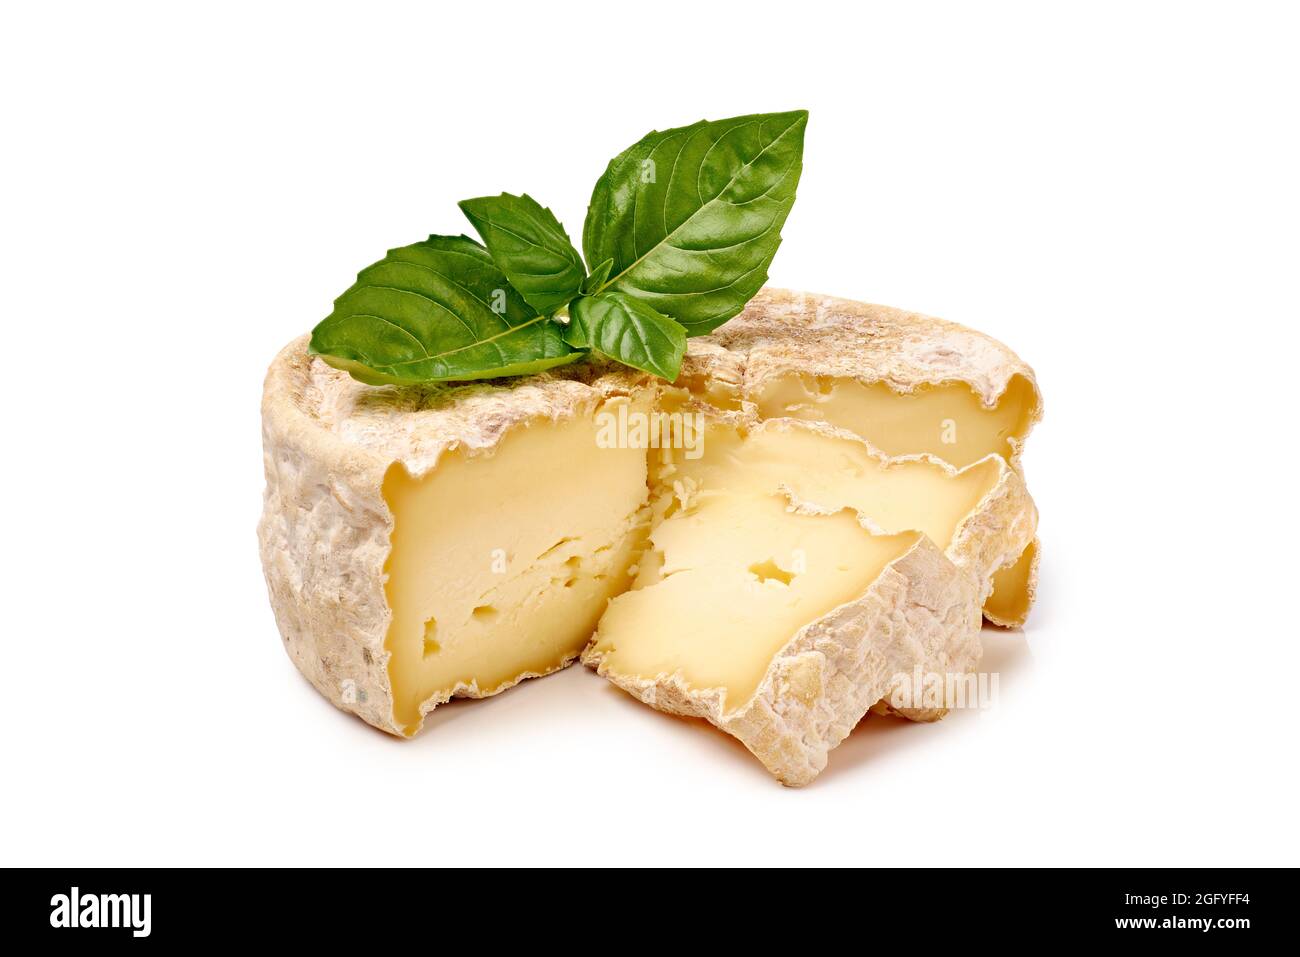 Delicatessen soft cheese with basil leaves isolated on white background Stock Photo